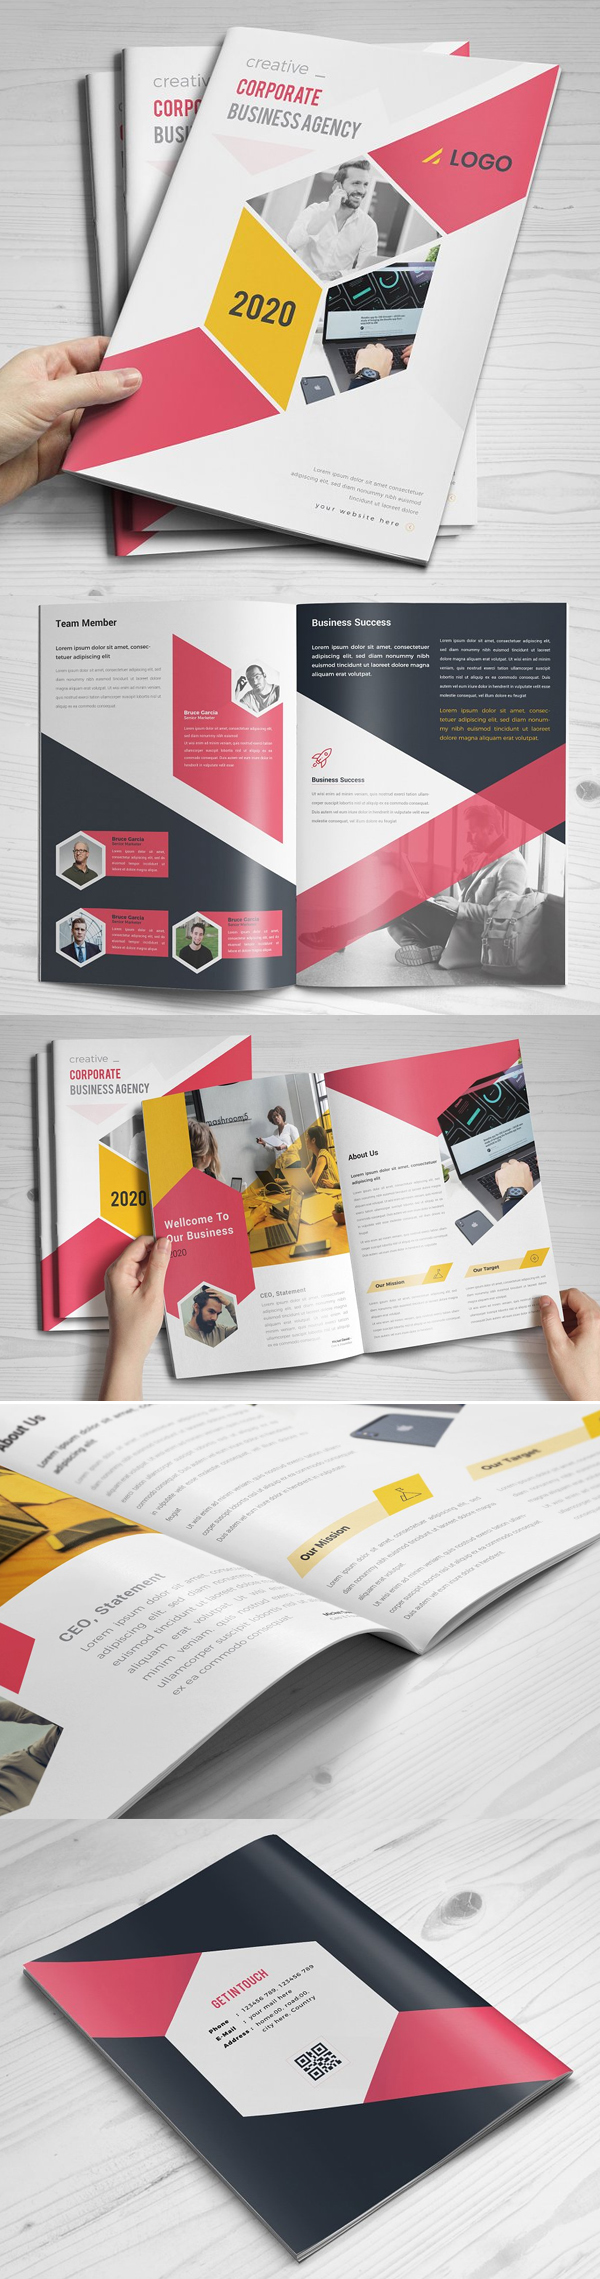 Awesome Business Brochure Template